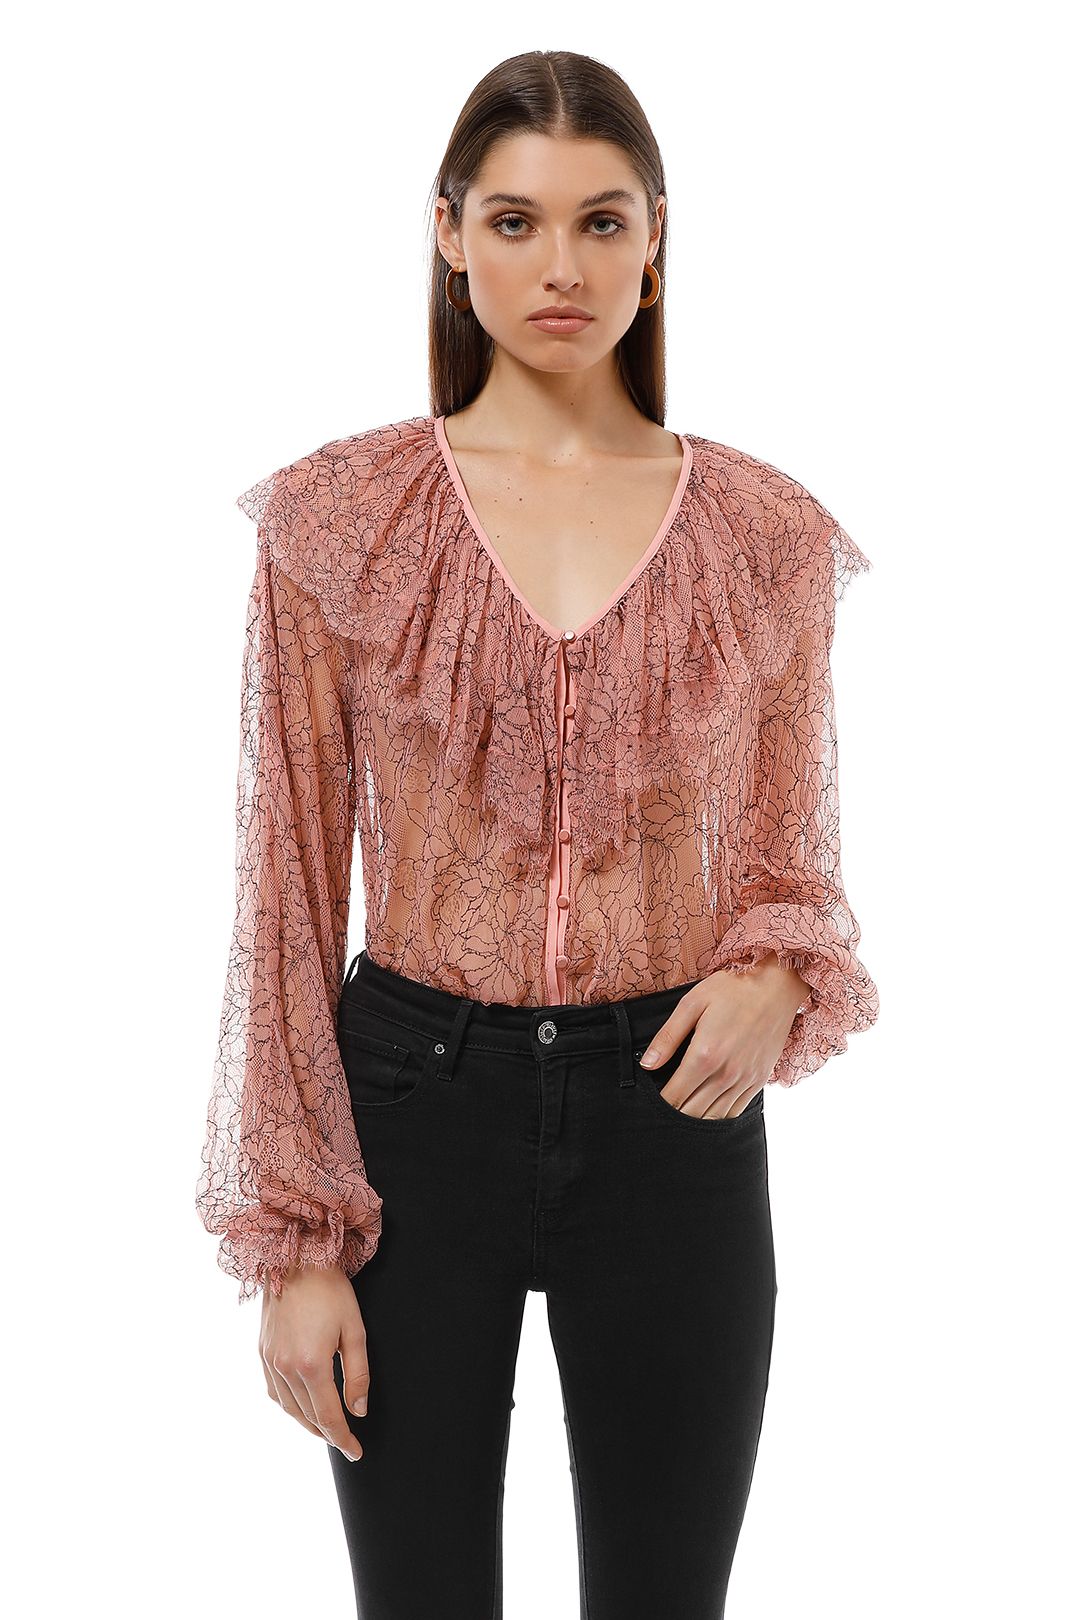 Alice McCall - Folklore Blouse - Blush Pink - Front Crop